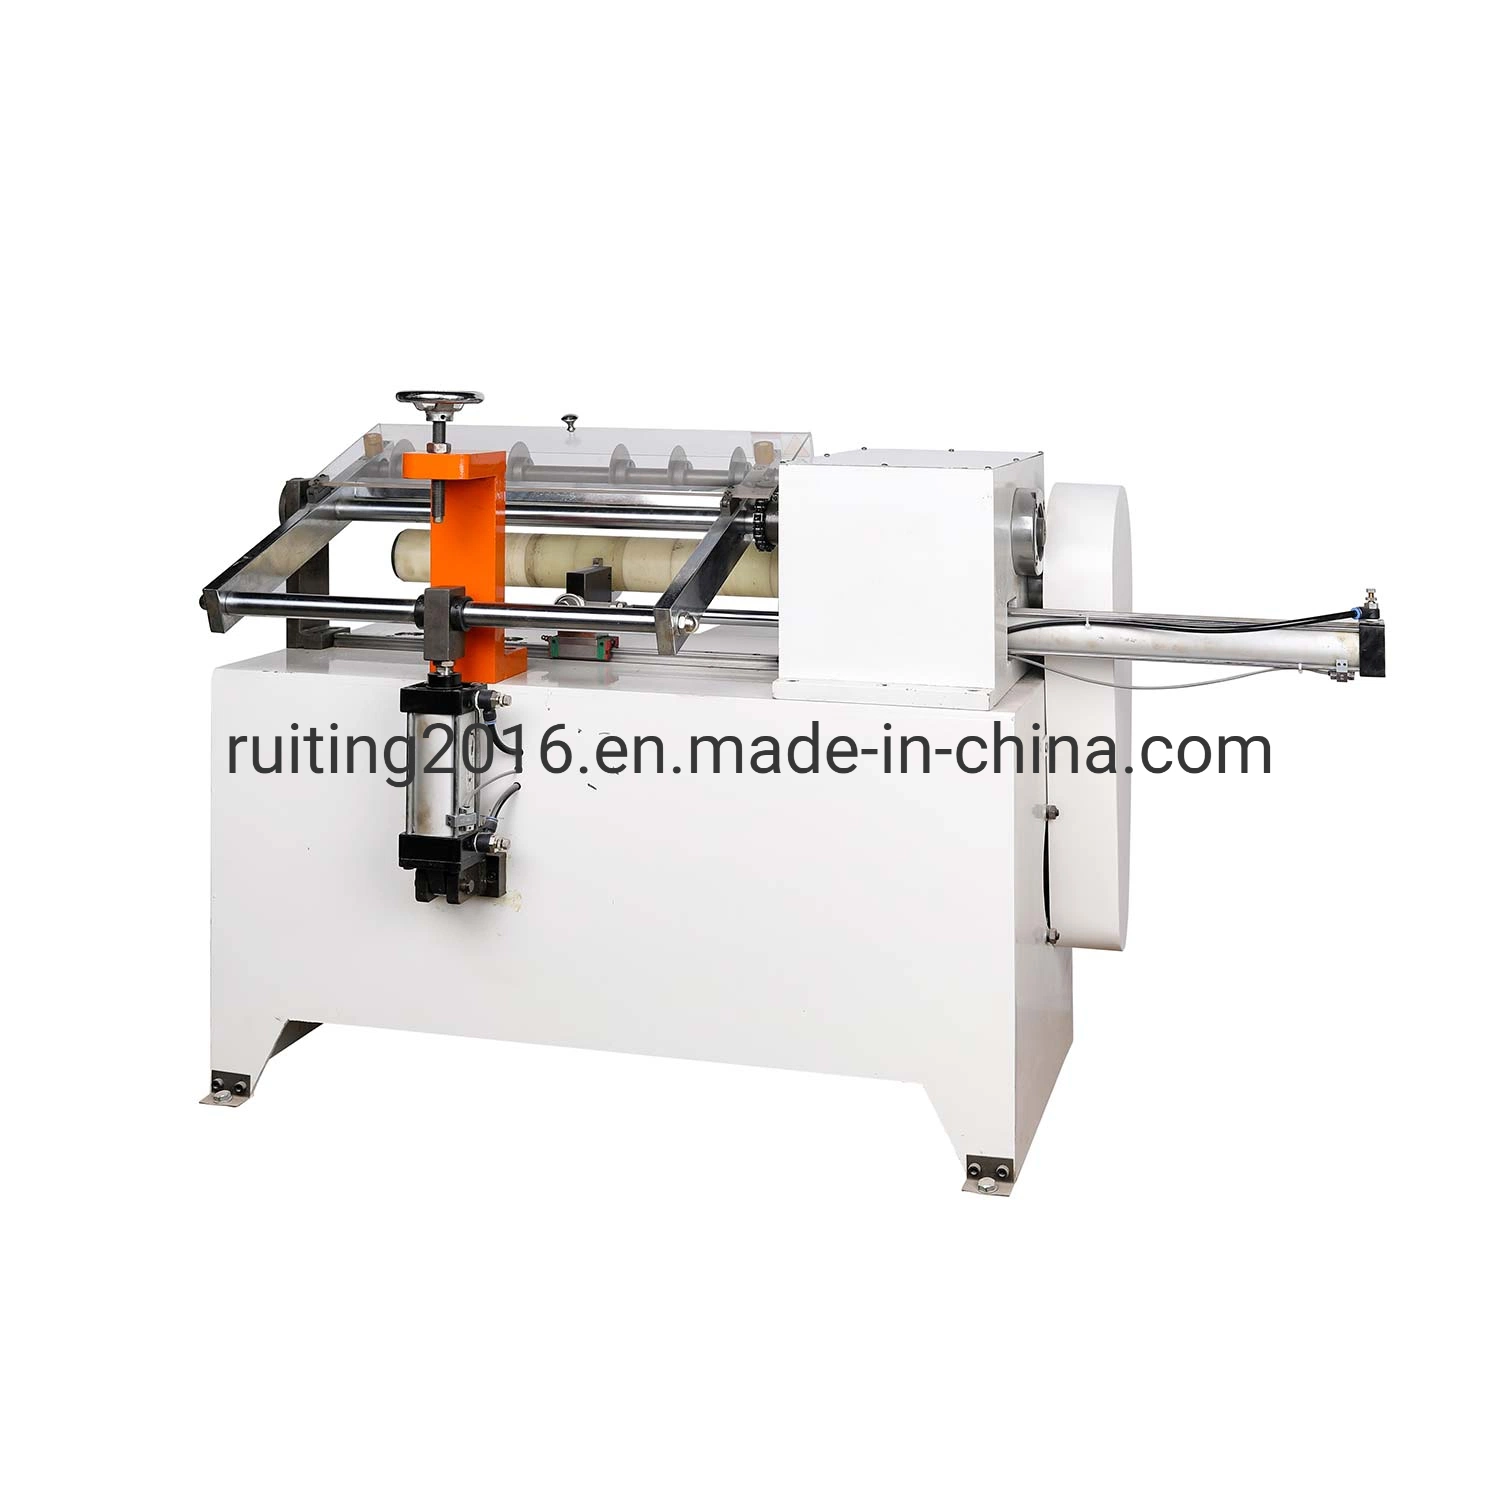 Rt-1000 Automatic Paper Core Cutter Round Knife Blade Paper Tube Cutting Machine Price for Sale